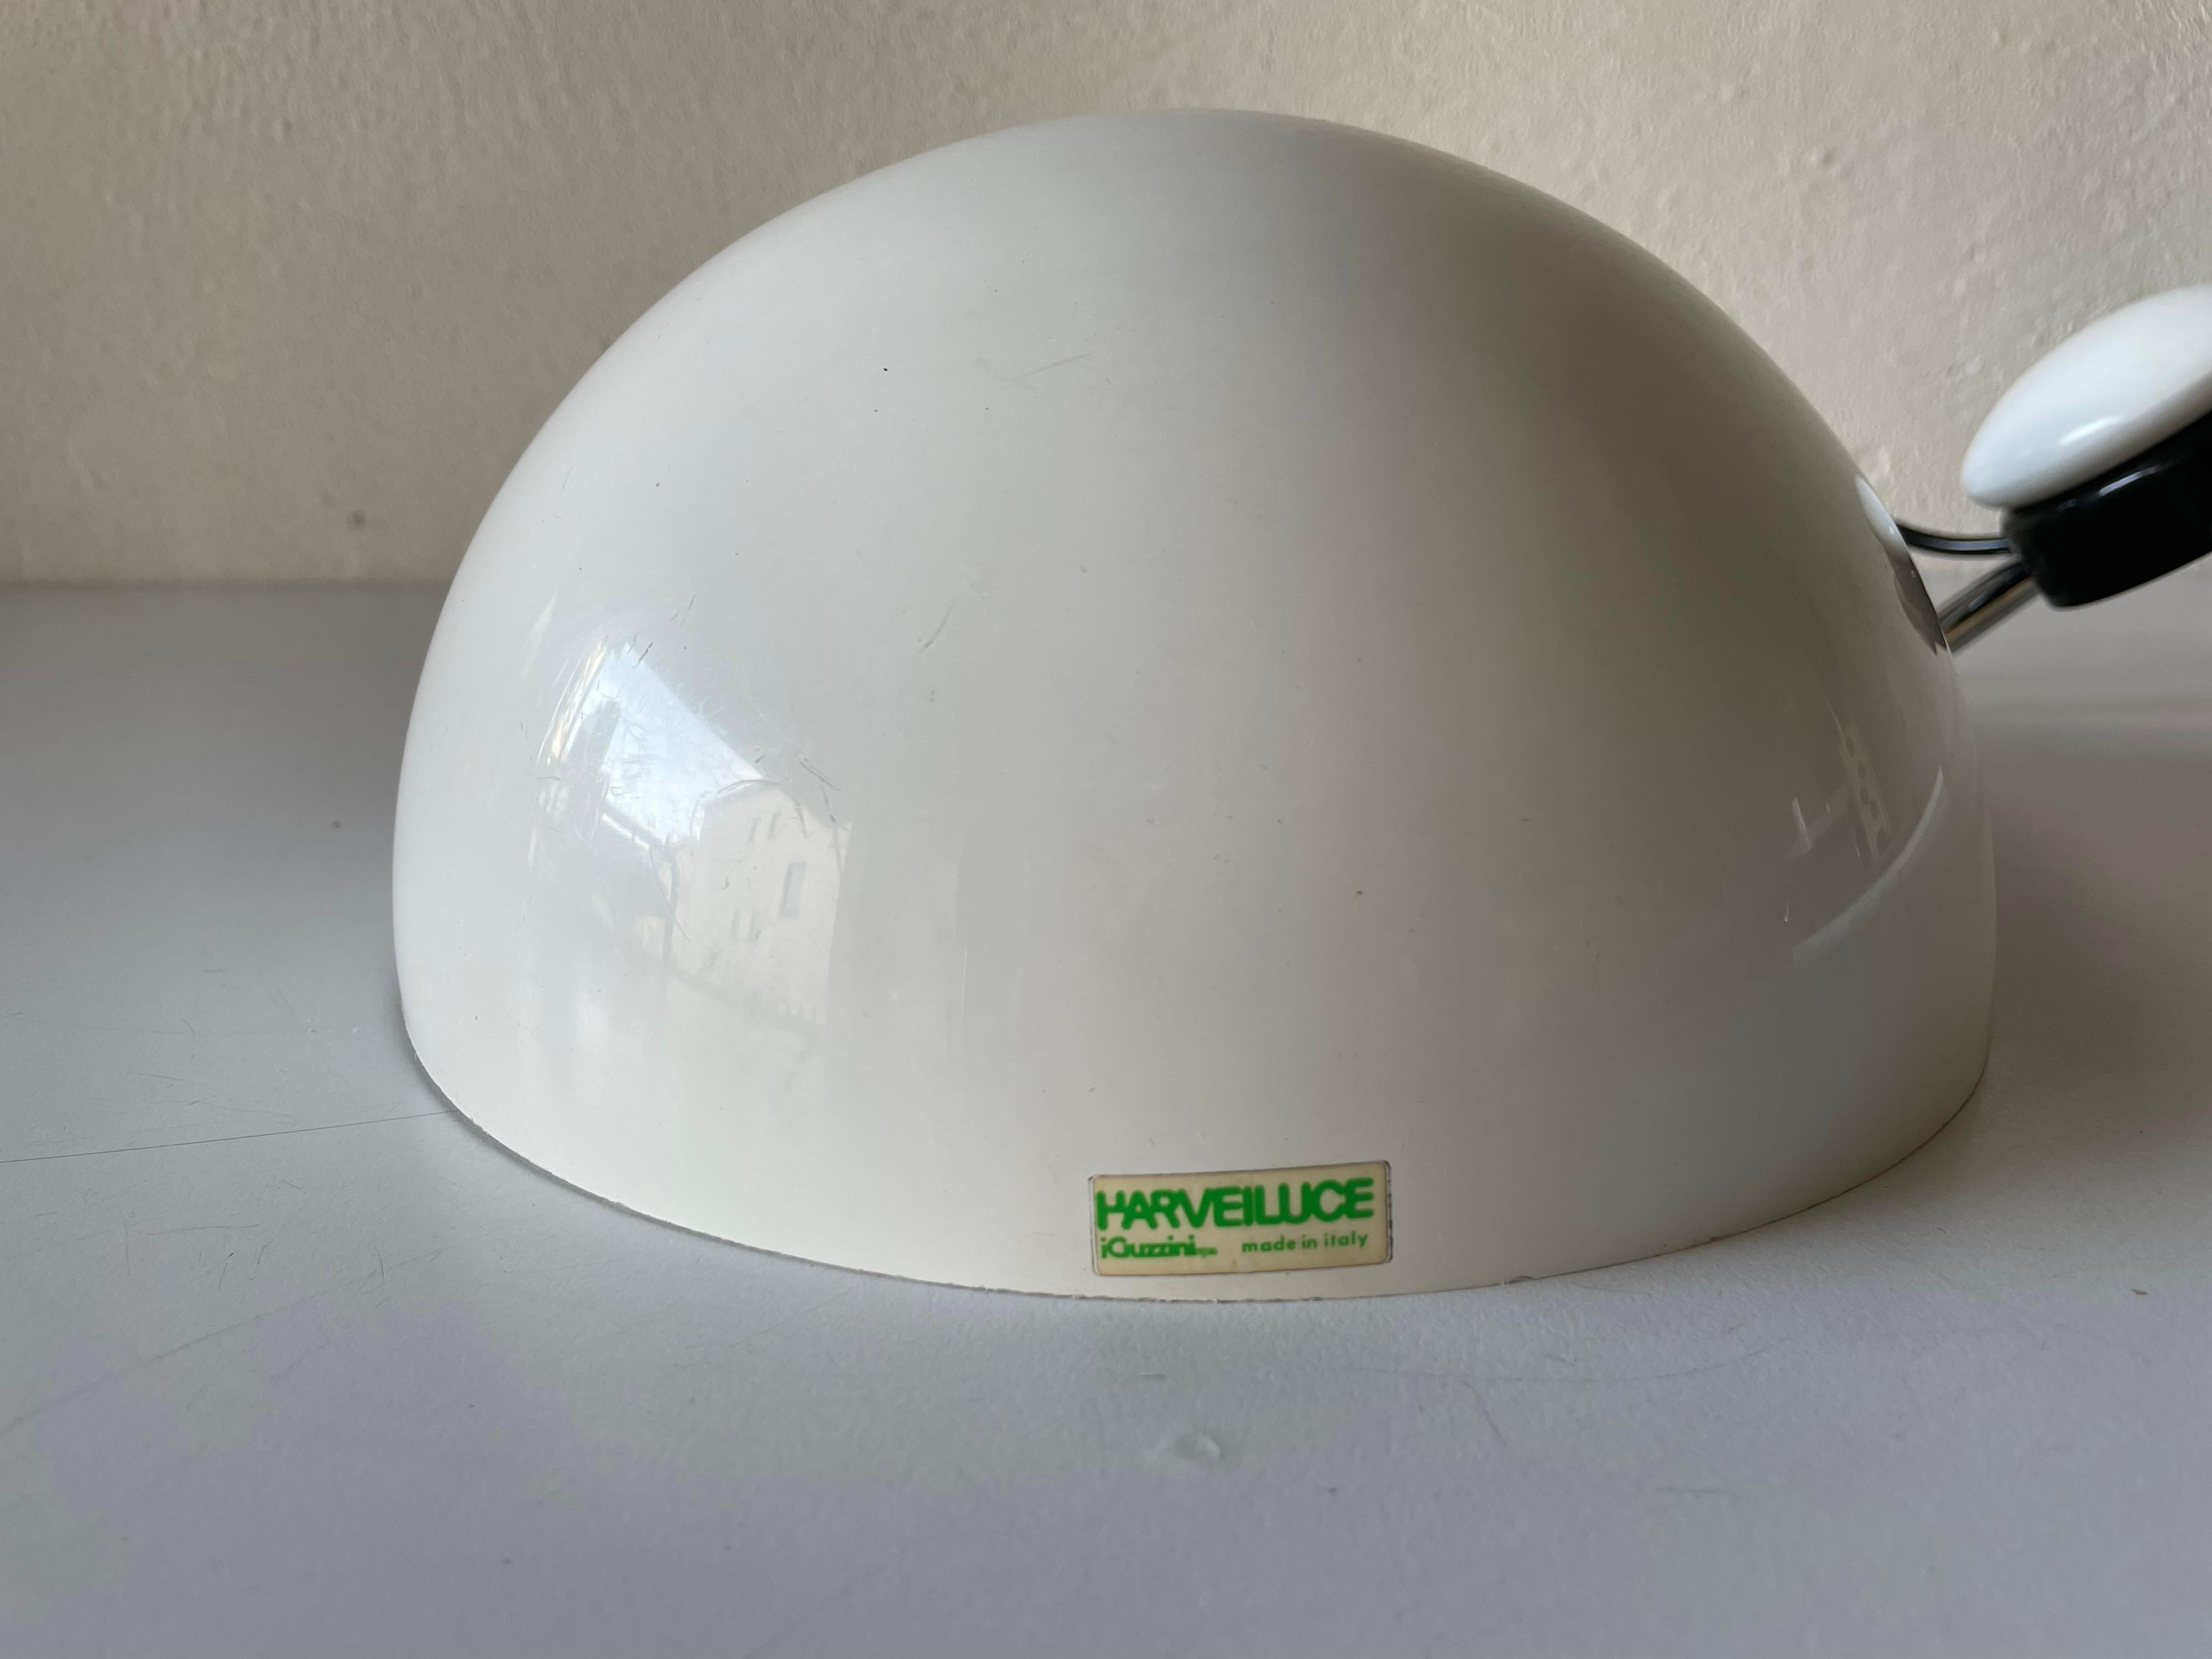 Late 20th Century White Metal Wall Lamp by iGuzzini for Harveiluce, 1970s, Italy For Sale